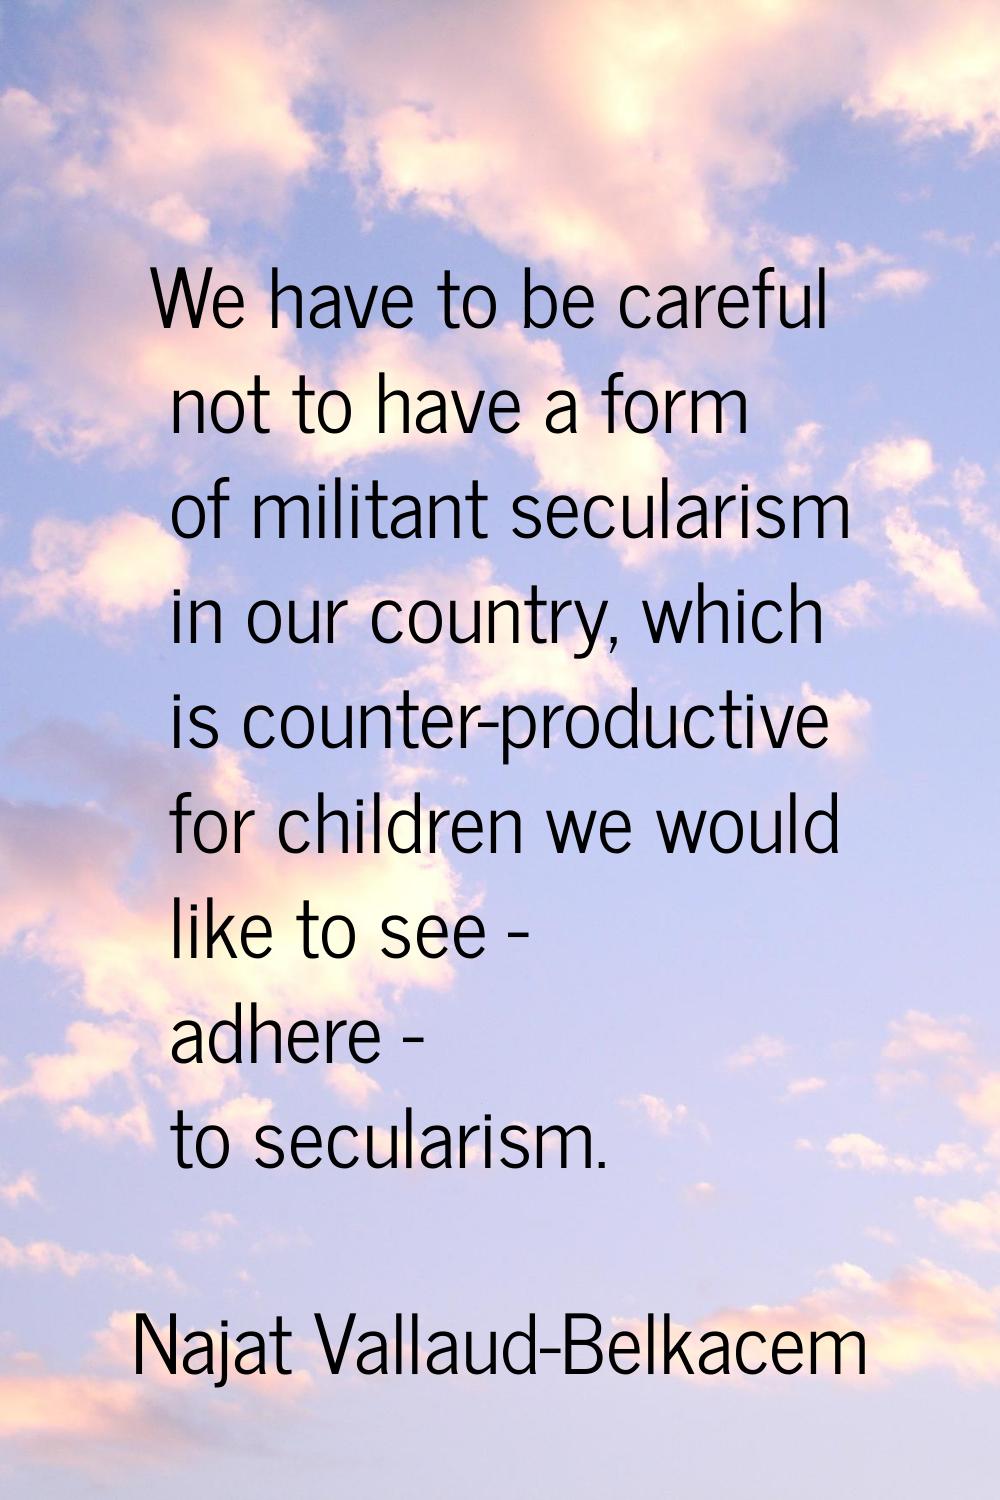 We have to be careful not to have a form of militant secularism in our country, which is counter-pr